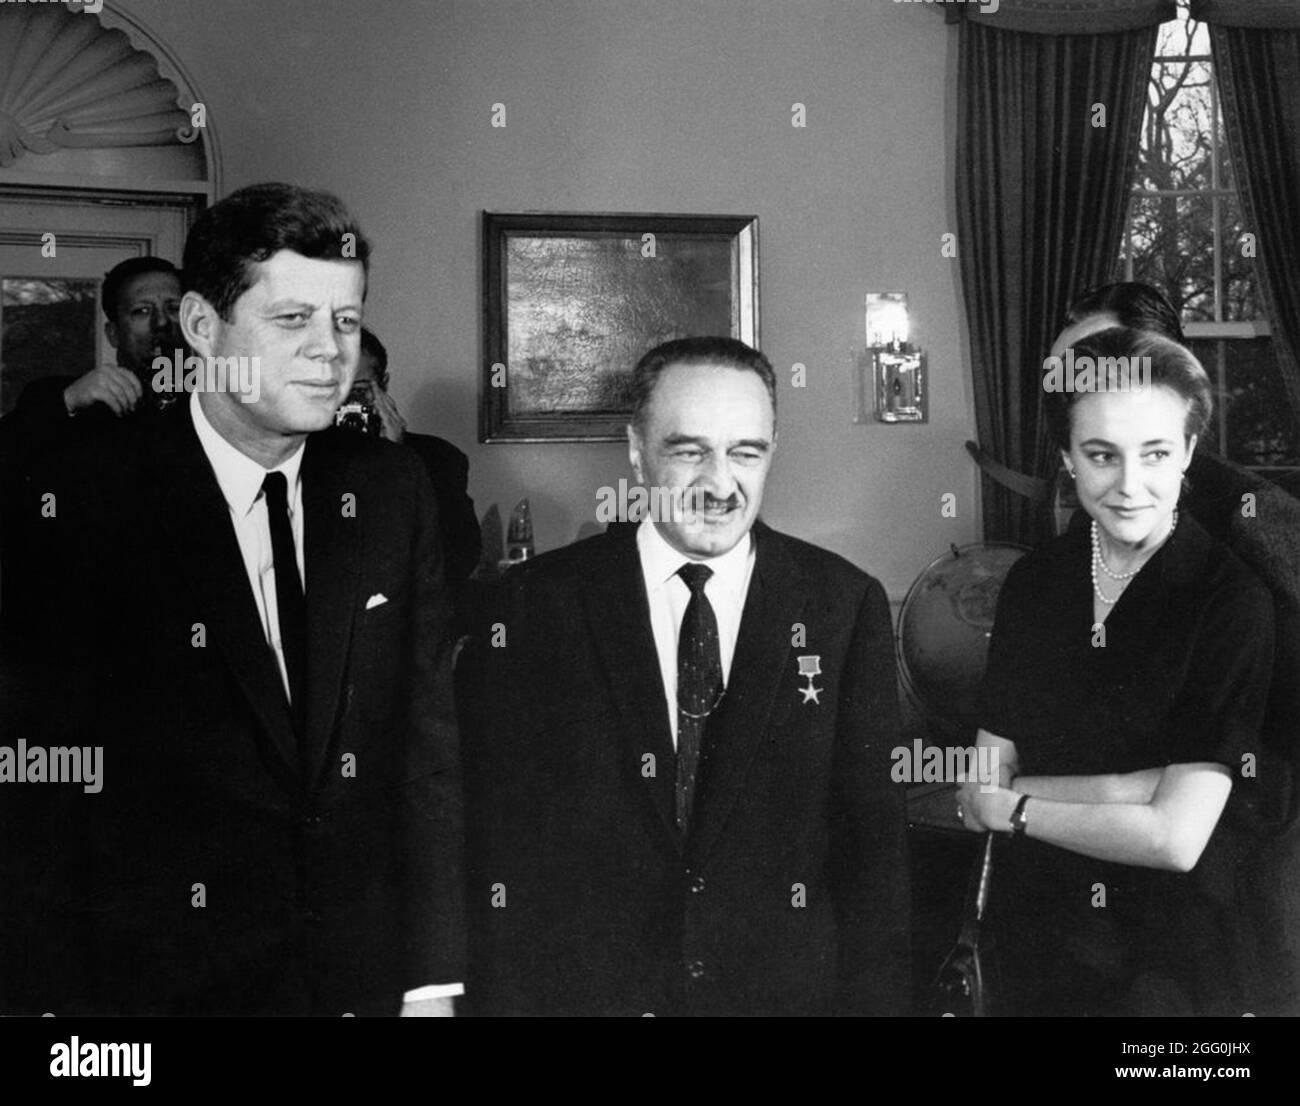 President Kennedy meeting with Anastas Mikoyan on 29  November 1962 credit Abbie Rowe. White House Photographs. John F. Kennedy Presidential Library and Museum, Boston Stock Photo